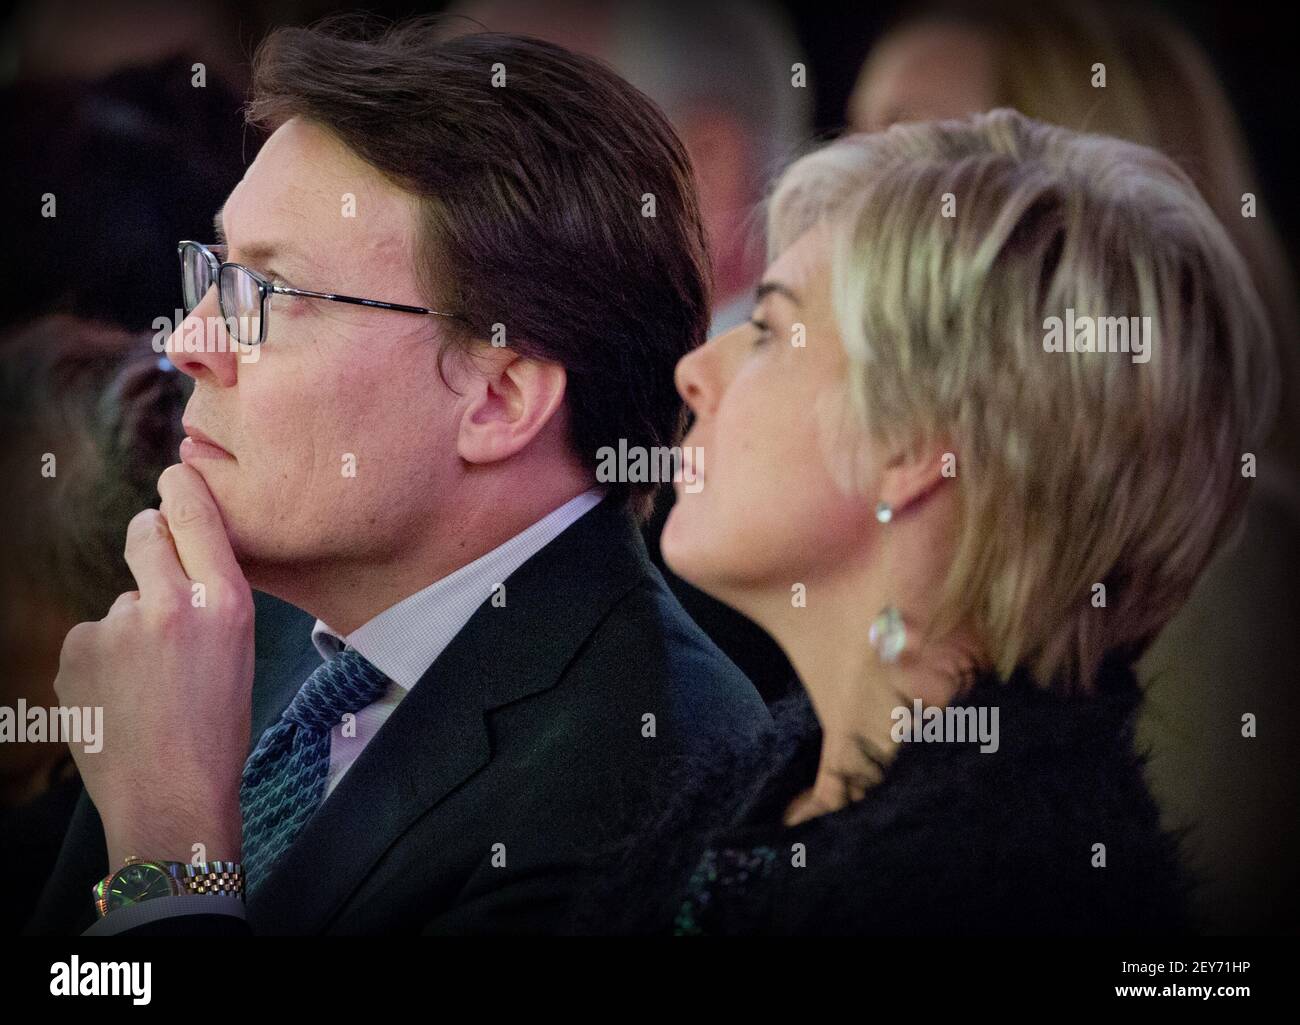 10-12-2014 AMSTERDAM - Prince Constantijn and Princess Laurentien attend the award ceremony of the Prince Claus Prize 2014 to Columbian artist and plant expert Abel RodrÃguez at the Royal Palace in Amsterdam (Photo by Robin Utrecht/Sipa USA) Stock Photo